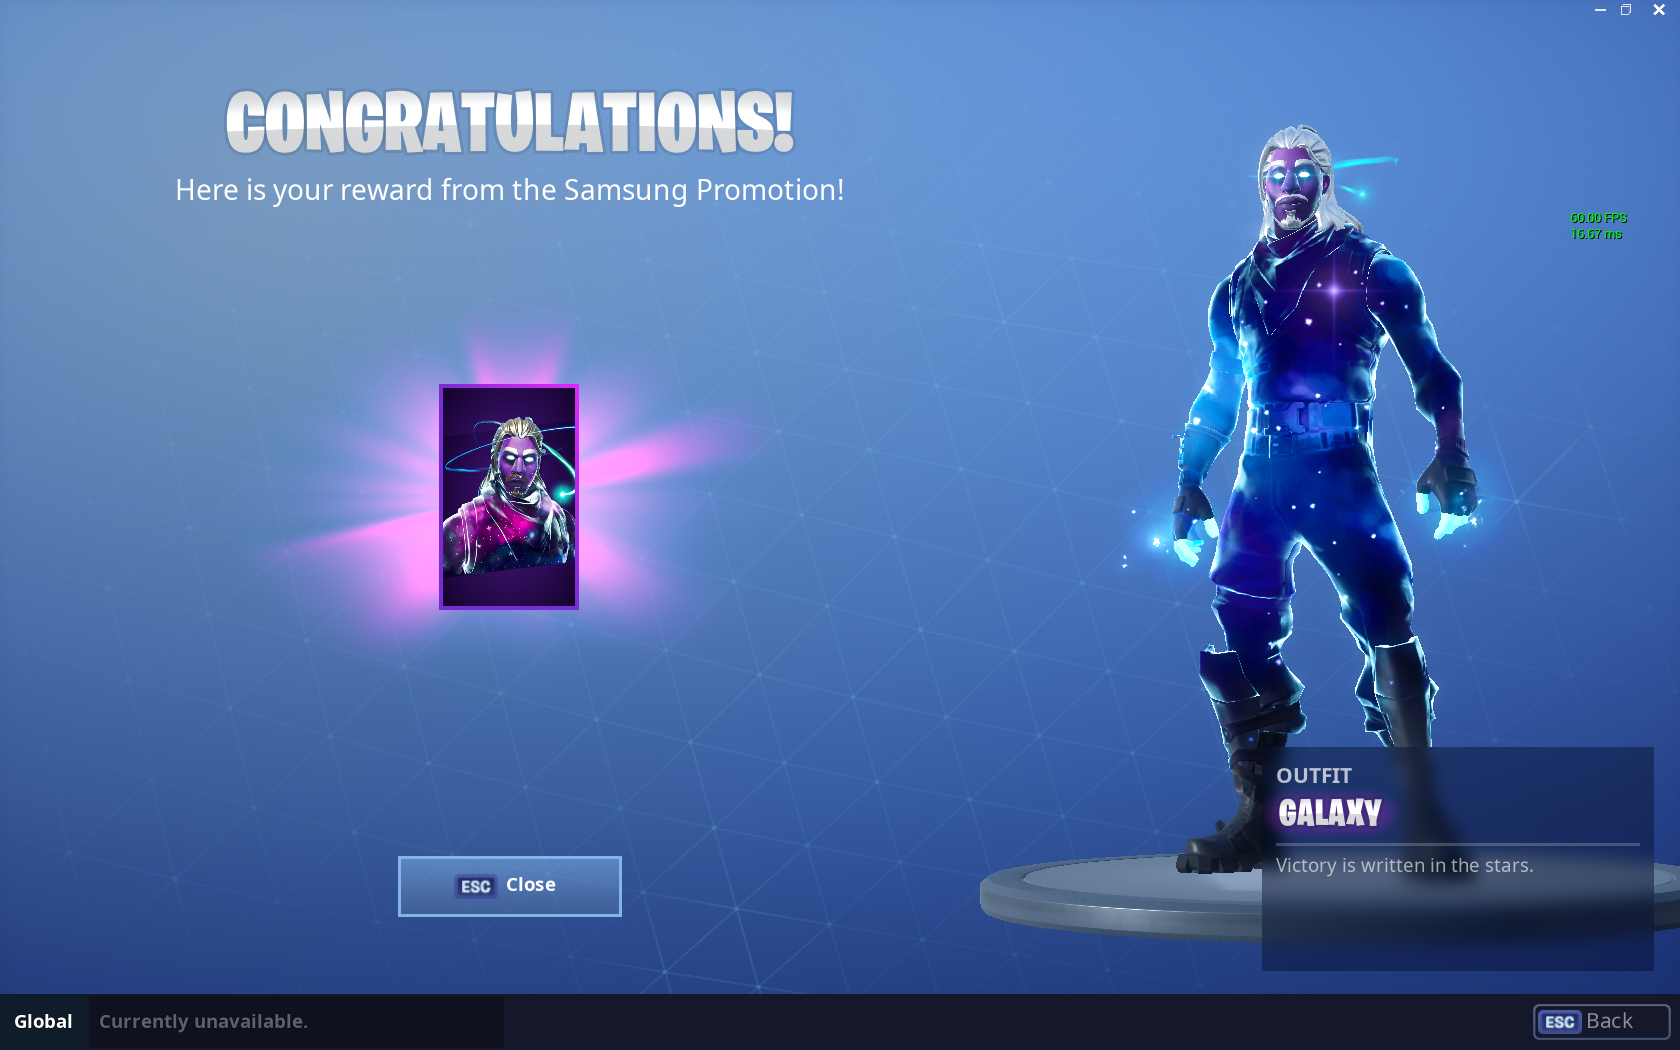 Free Download Fortnite Galaxy Skin Album On Imgur 1680x1050 For Your Desktop Mobile Tablet Explore 22 Galaxy Fortnite Wallpapers Galaxy Fortnite Wallpapers Galaxy Skin Fortnite Wallpapers Fortnite Galaxy Skin Wallpapers